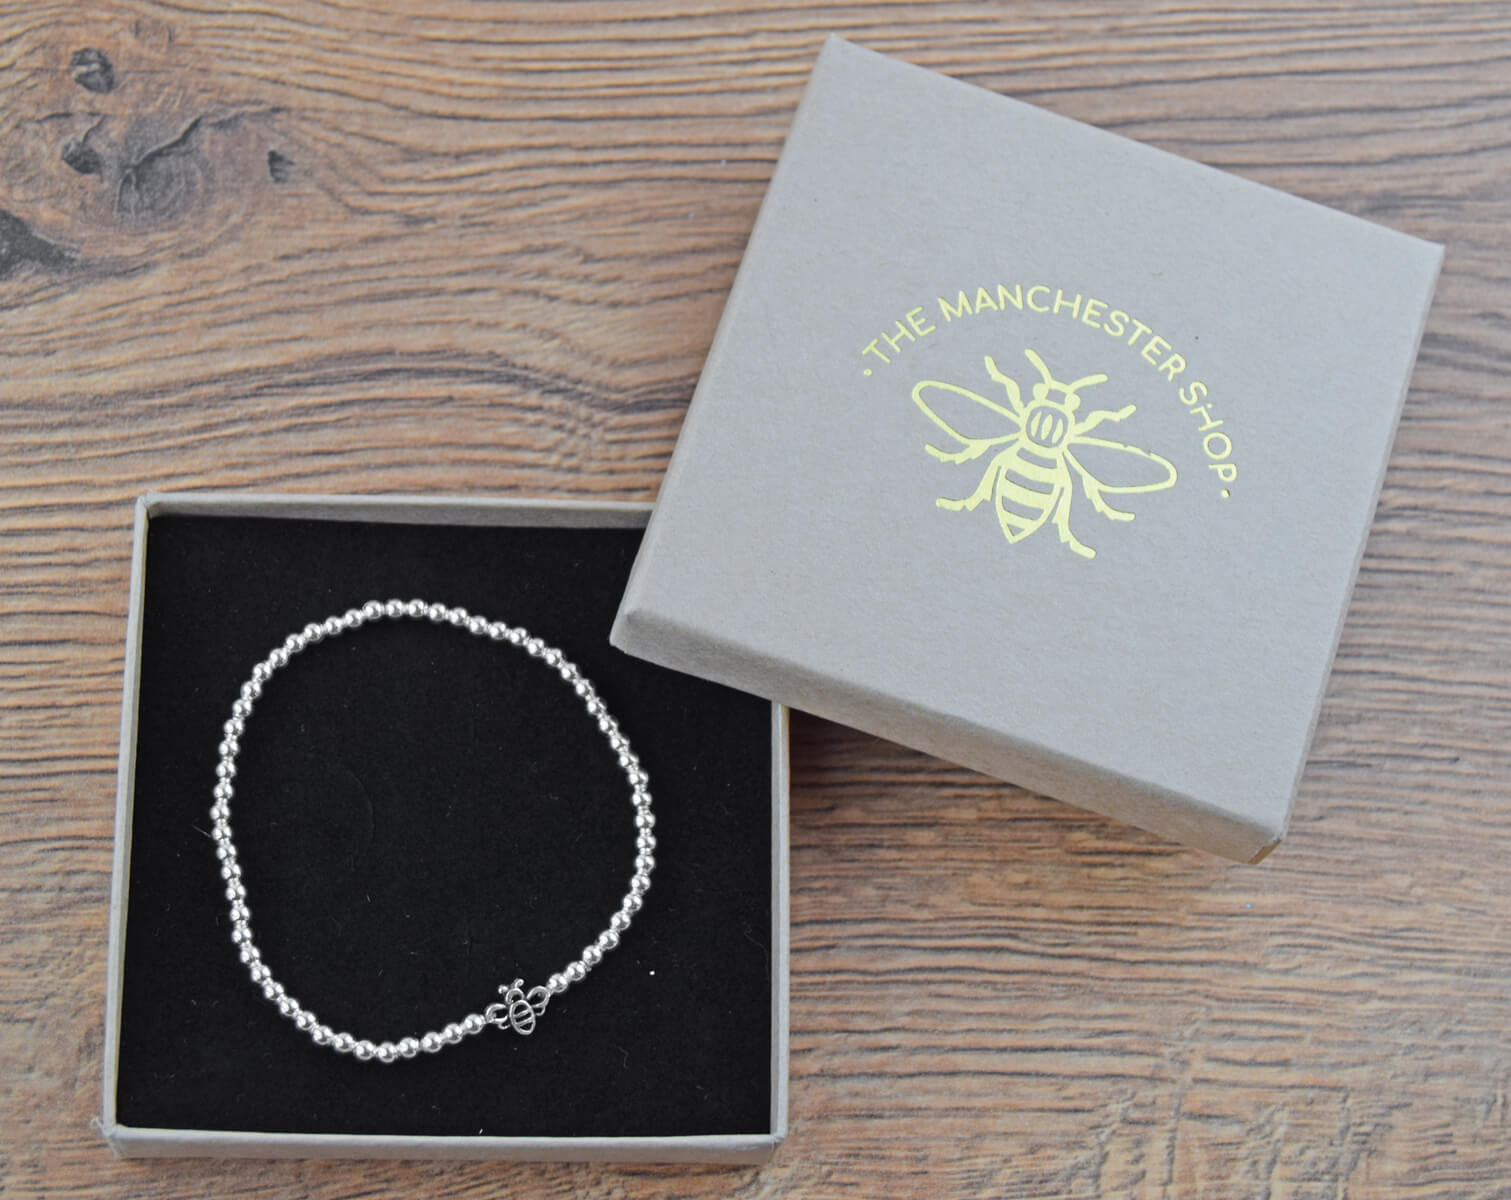 Round Bee Bracelet - The Manchester Shop